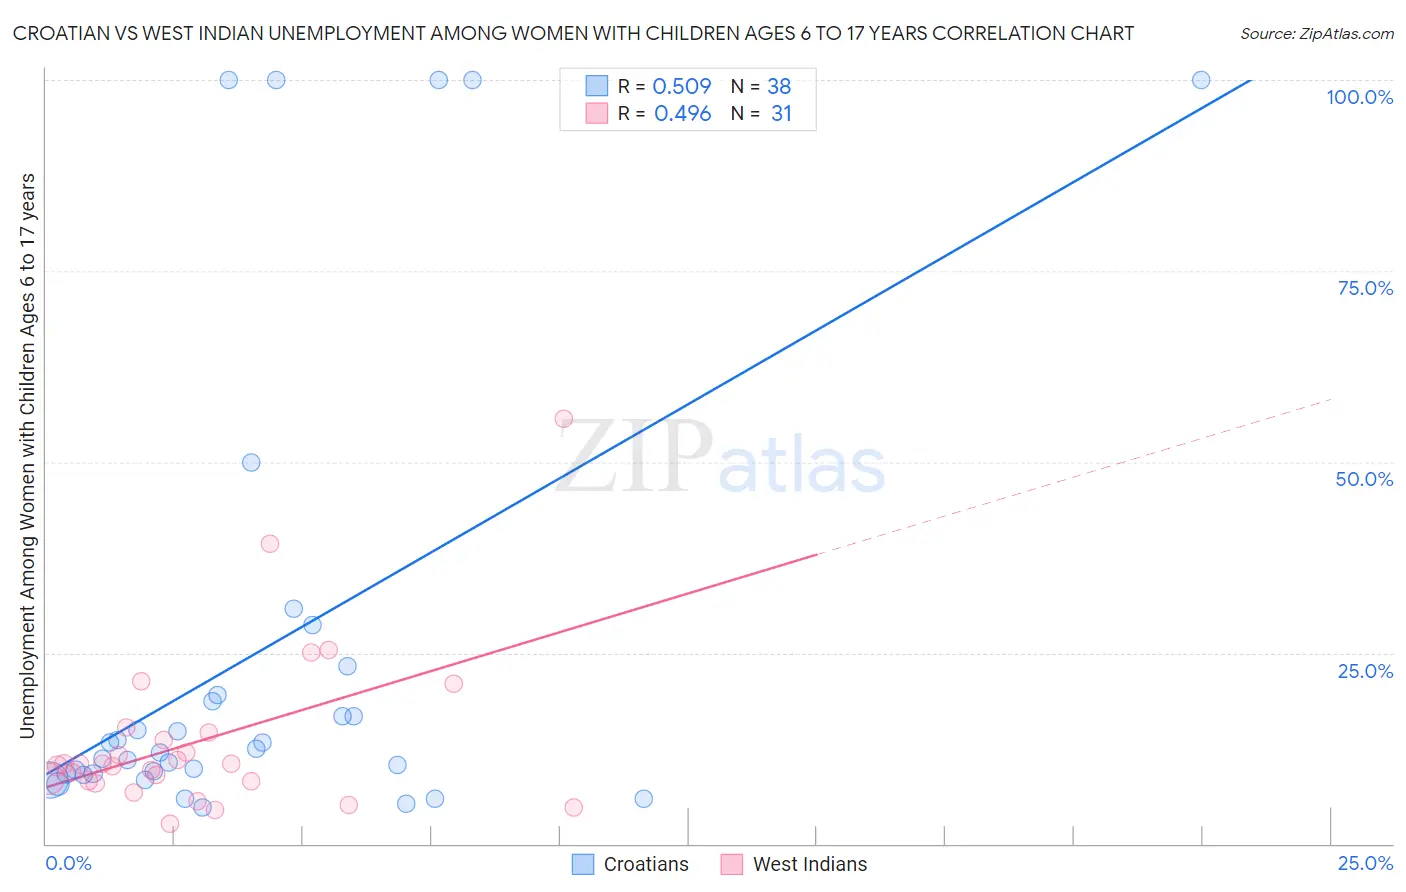 Croatian vs West Indian Unemployment Among Women with Children Ages 6 to 17 years